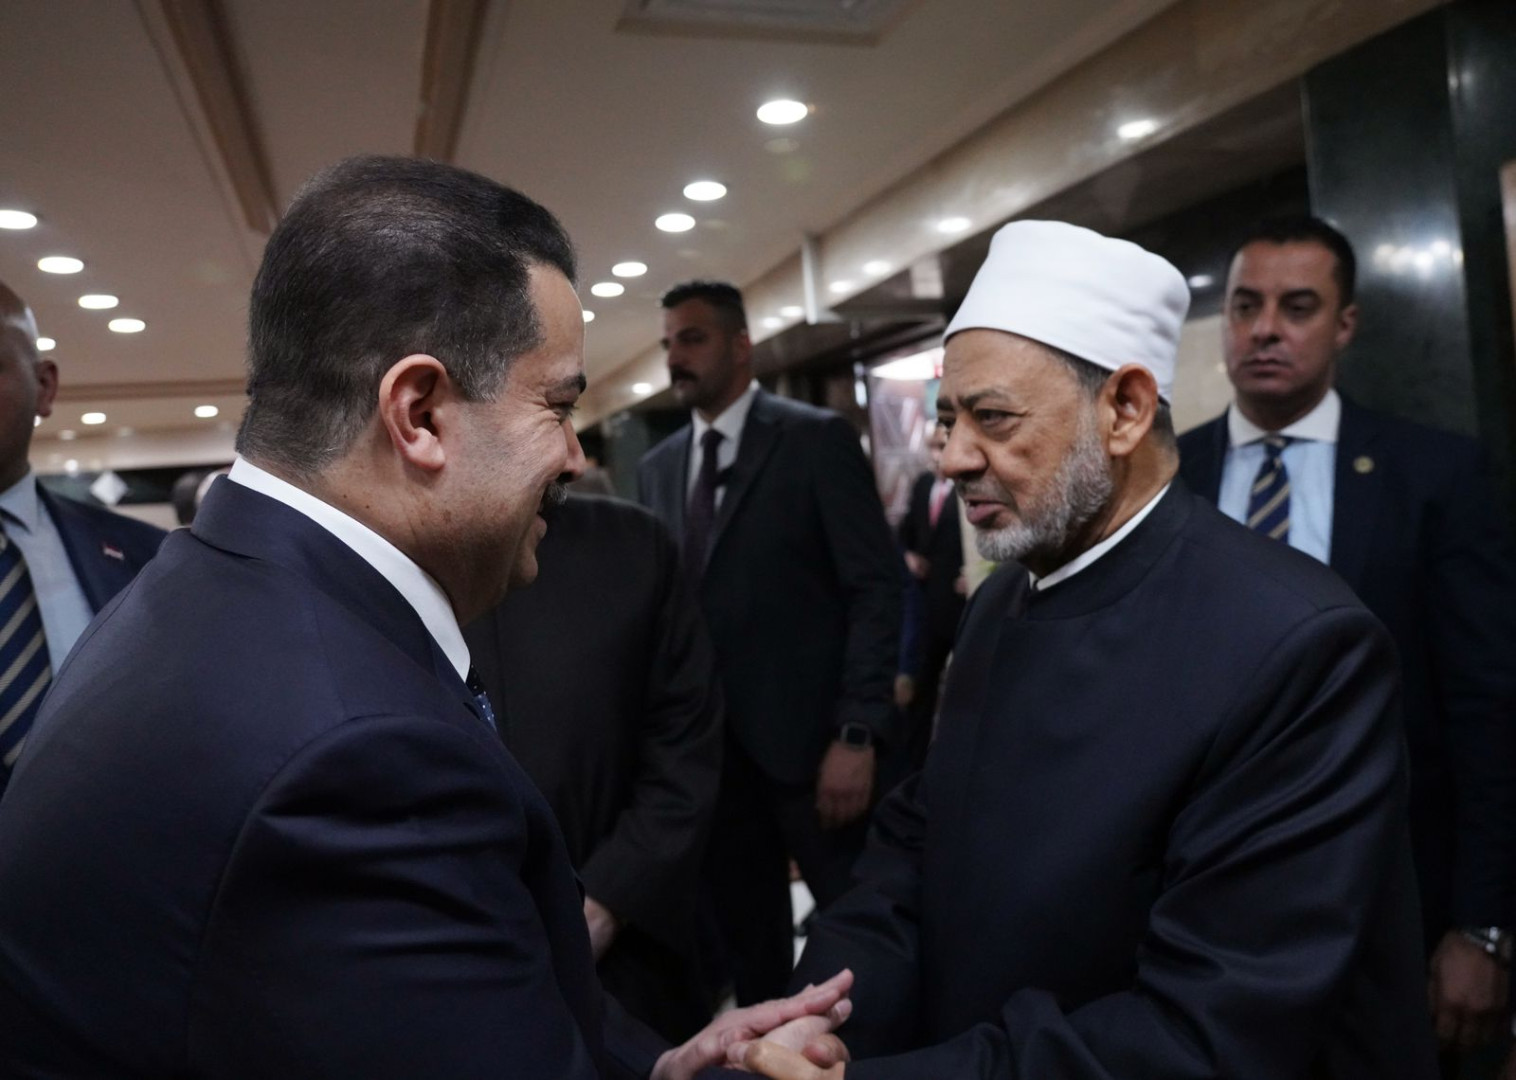 Historic visit of the Grand Imam of AlAzhar to Iraq confirmed for January